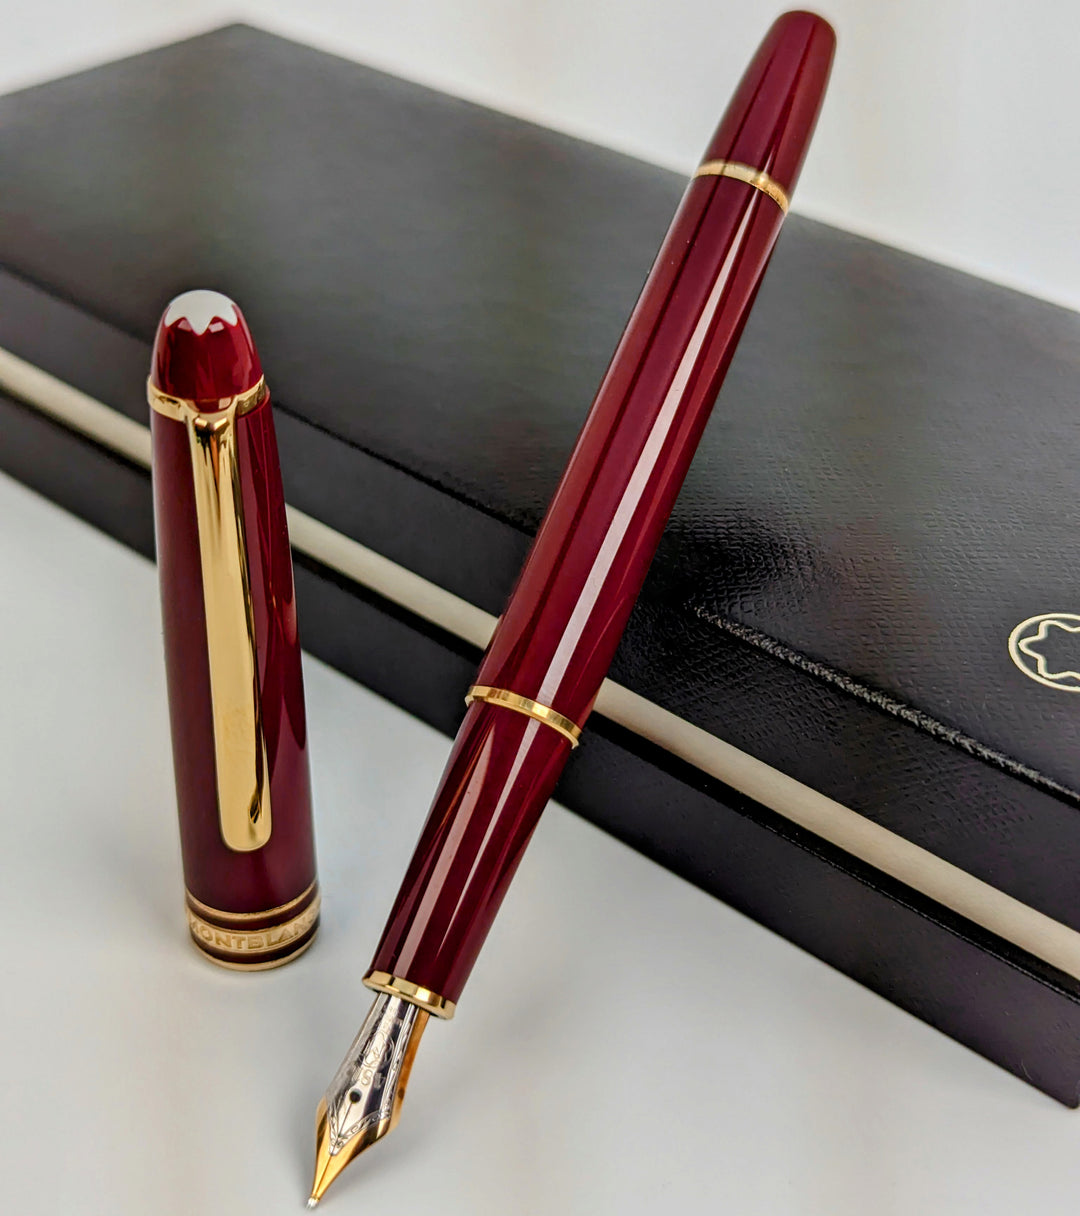 Montblanc has completely redefined its signature leather